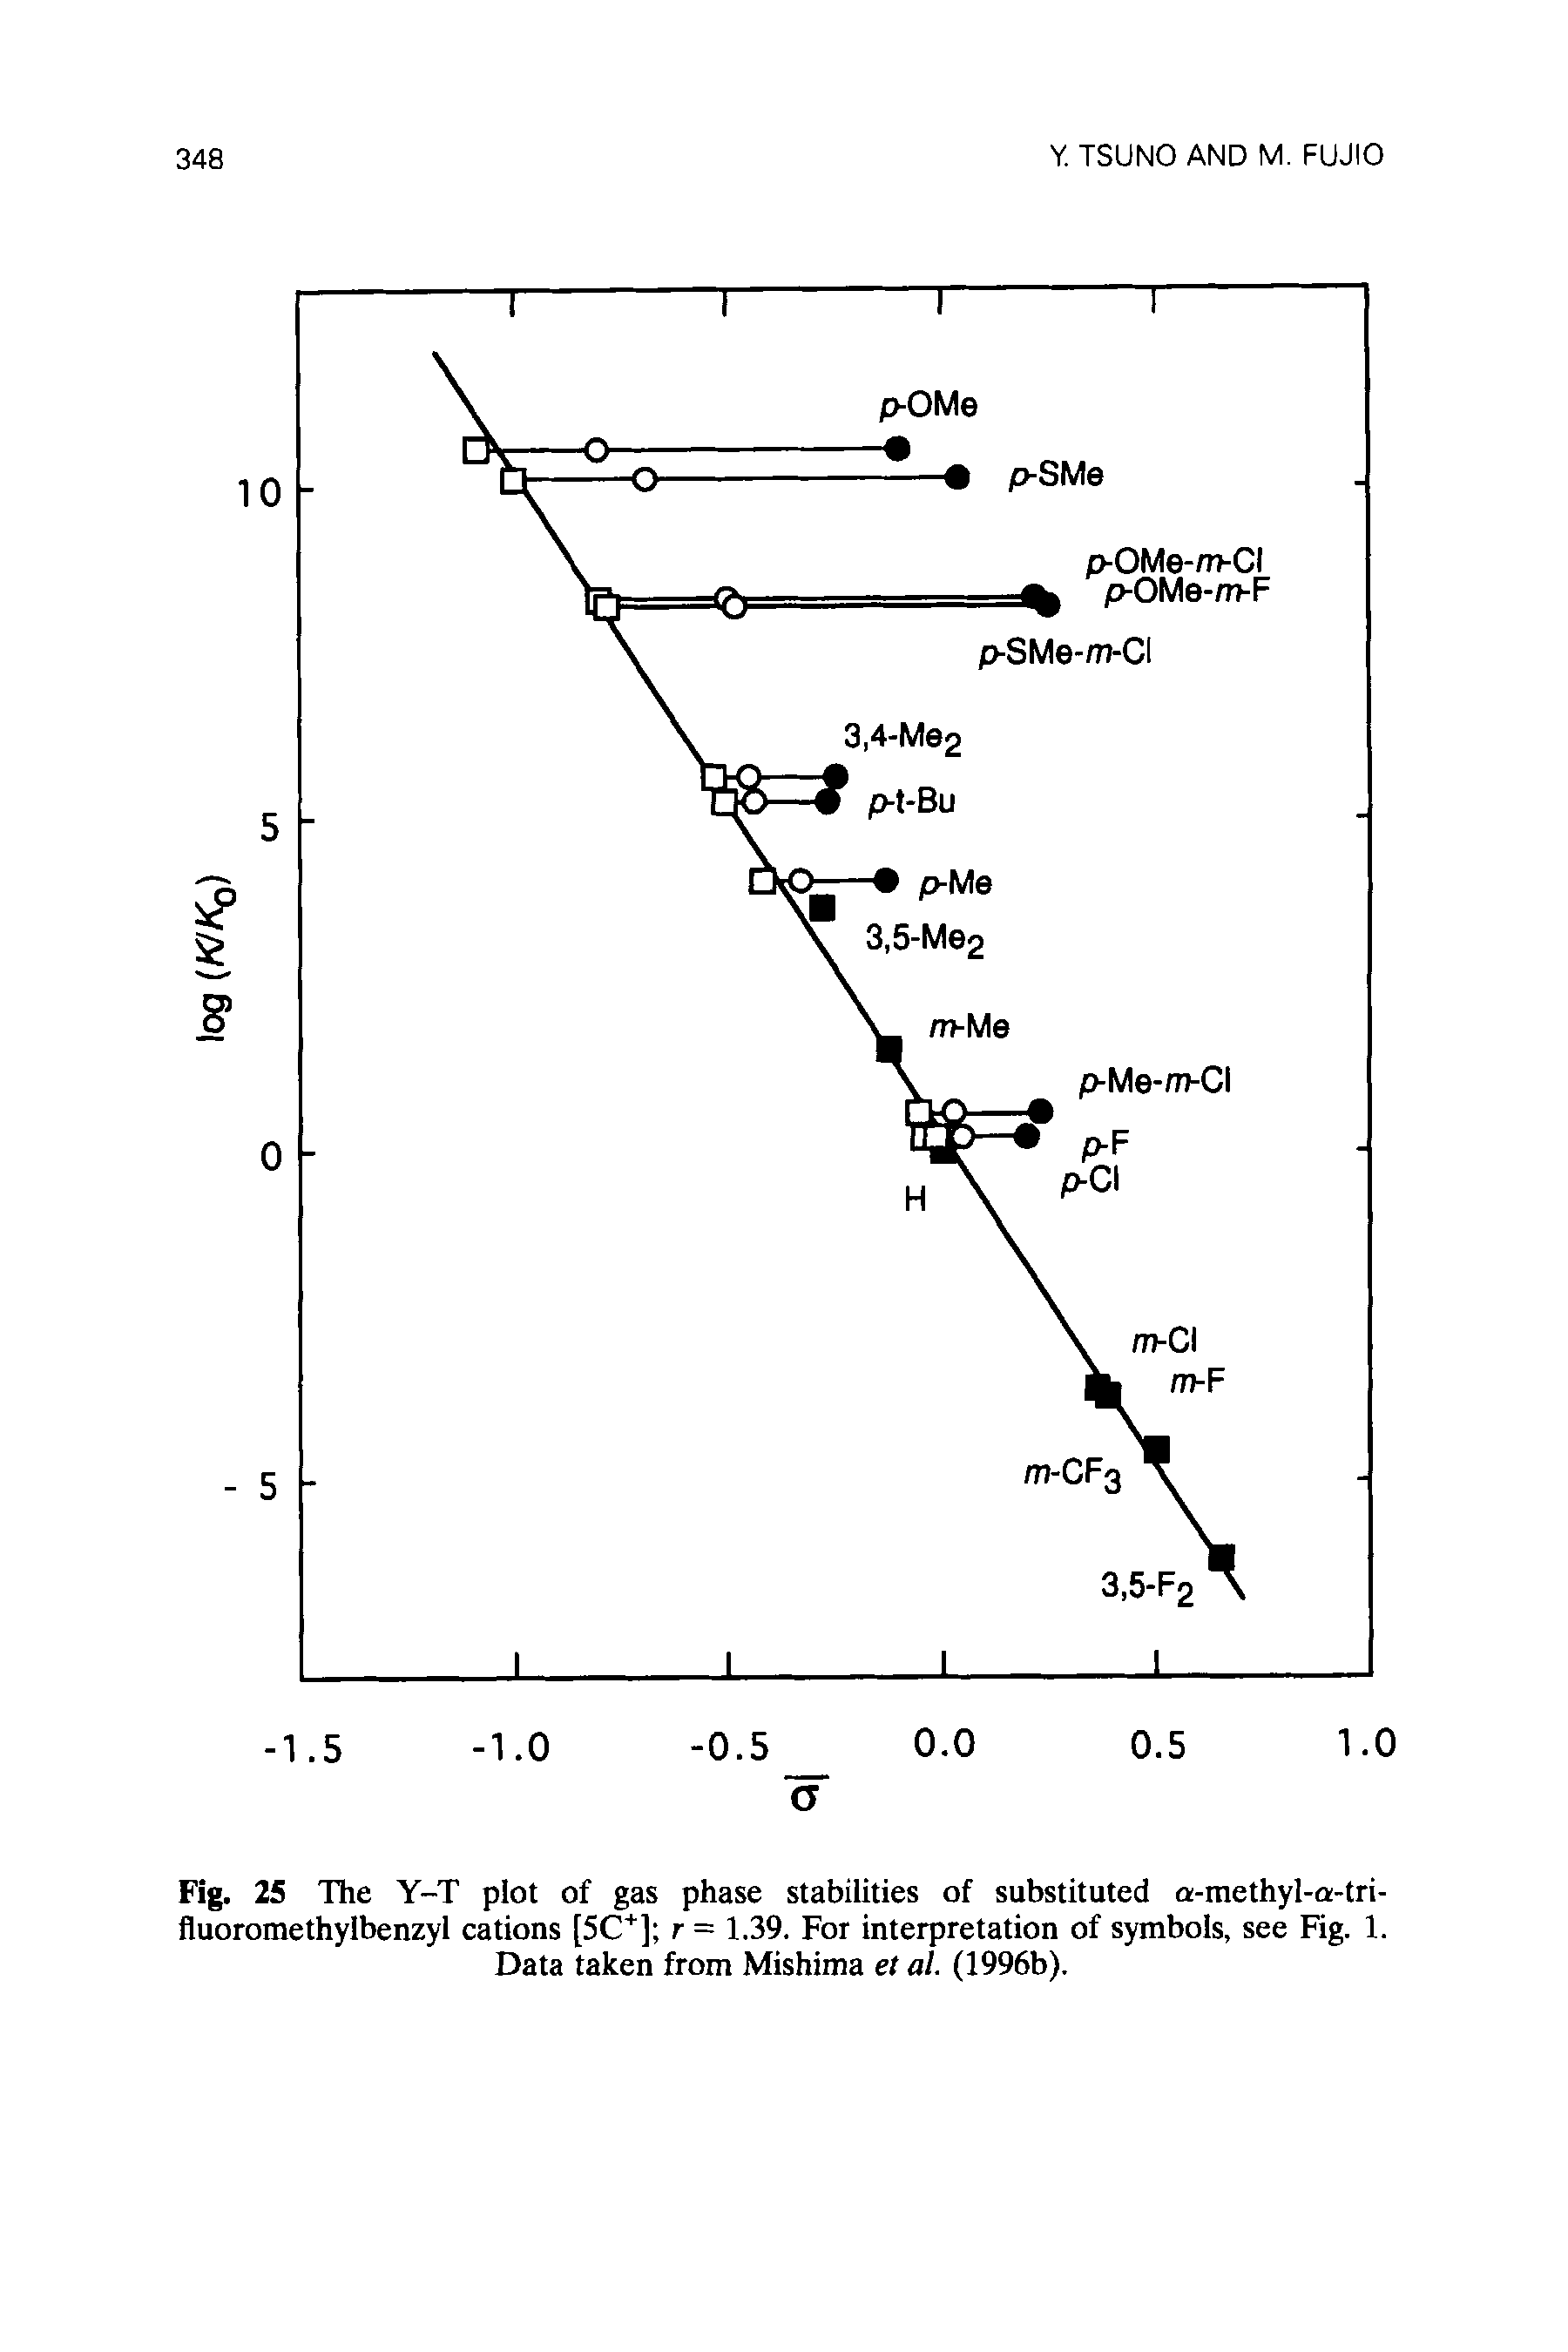 Fig. 25 The Y-T plot of gas phase stabilities of substituted a-methyl-a-tri-fluoromethylbenzyl cations [SC ] r = 1.39. For interpretation of symbols, see Fig. 1. Data taken from Mishima et al. (1996b).